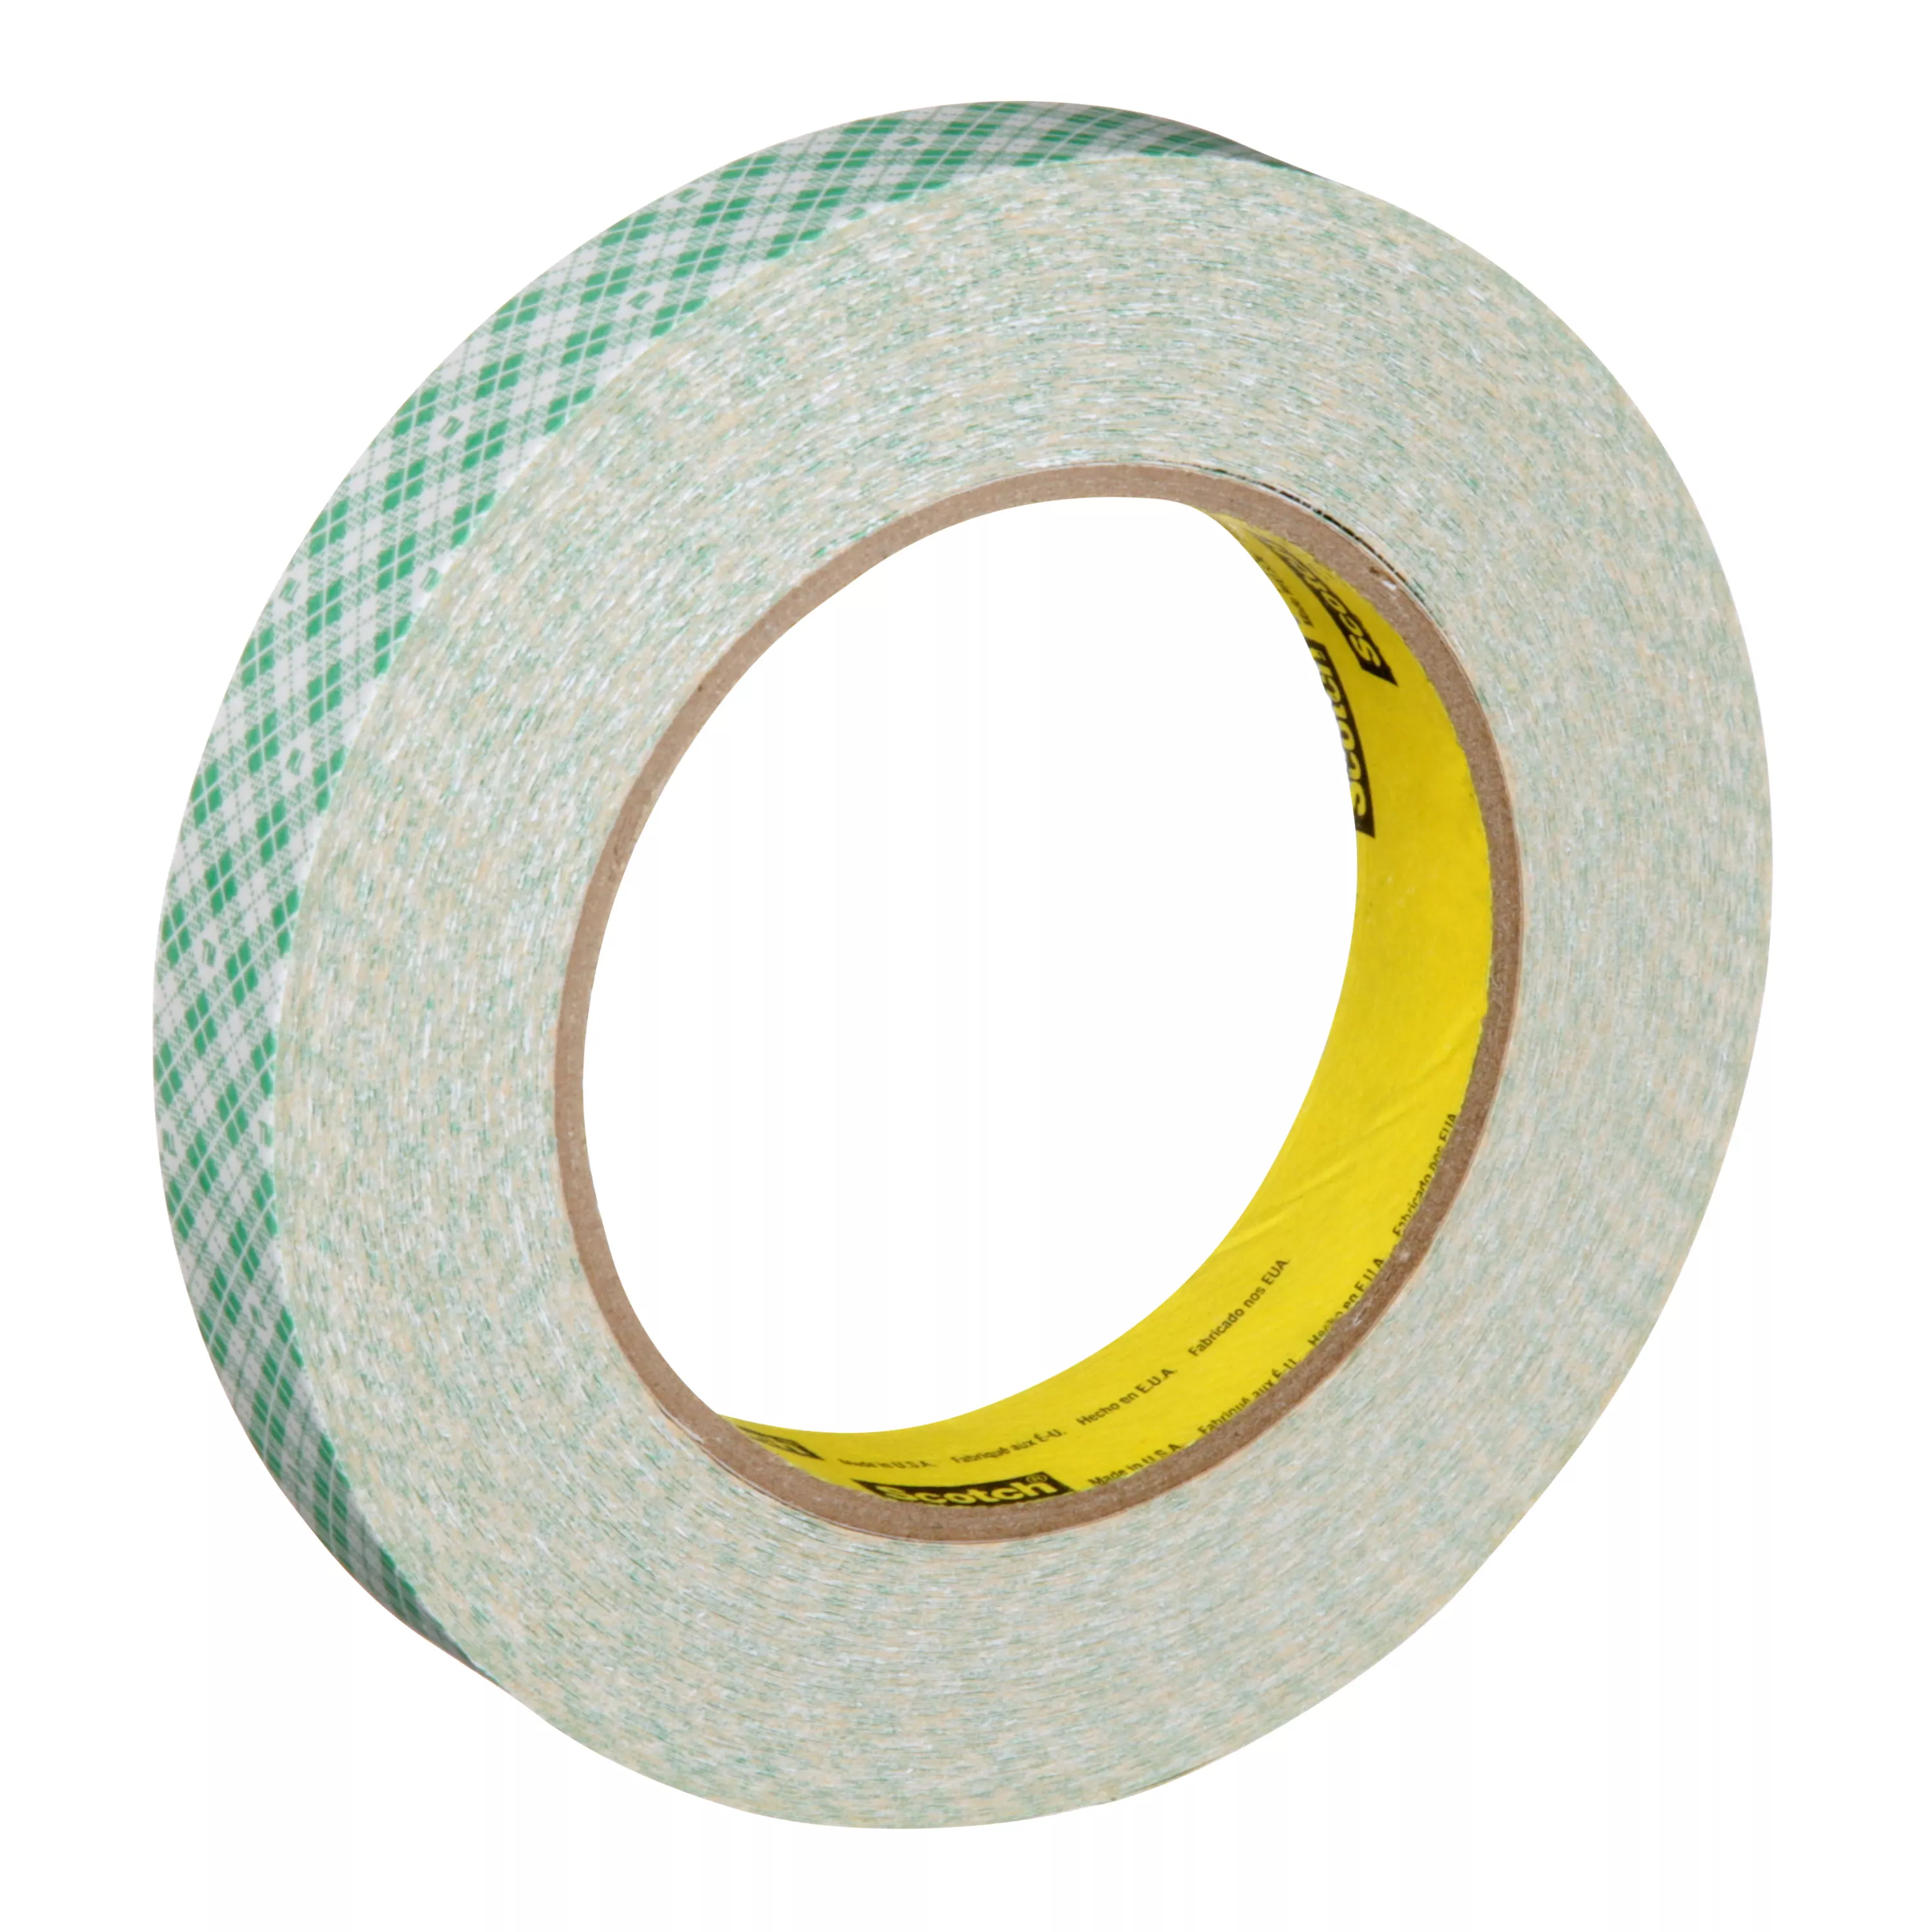 SKU 7000049313 | 3M™ Double Coated Paper Tape 410M